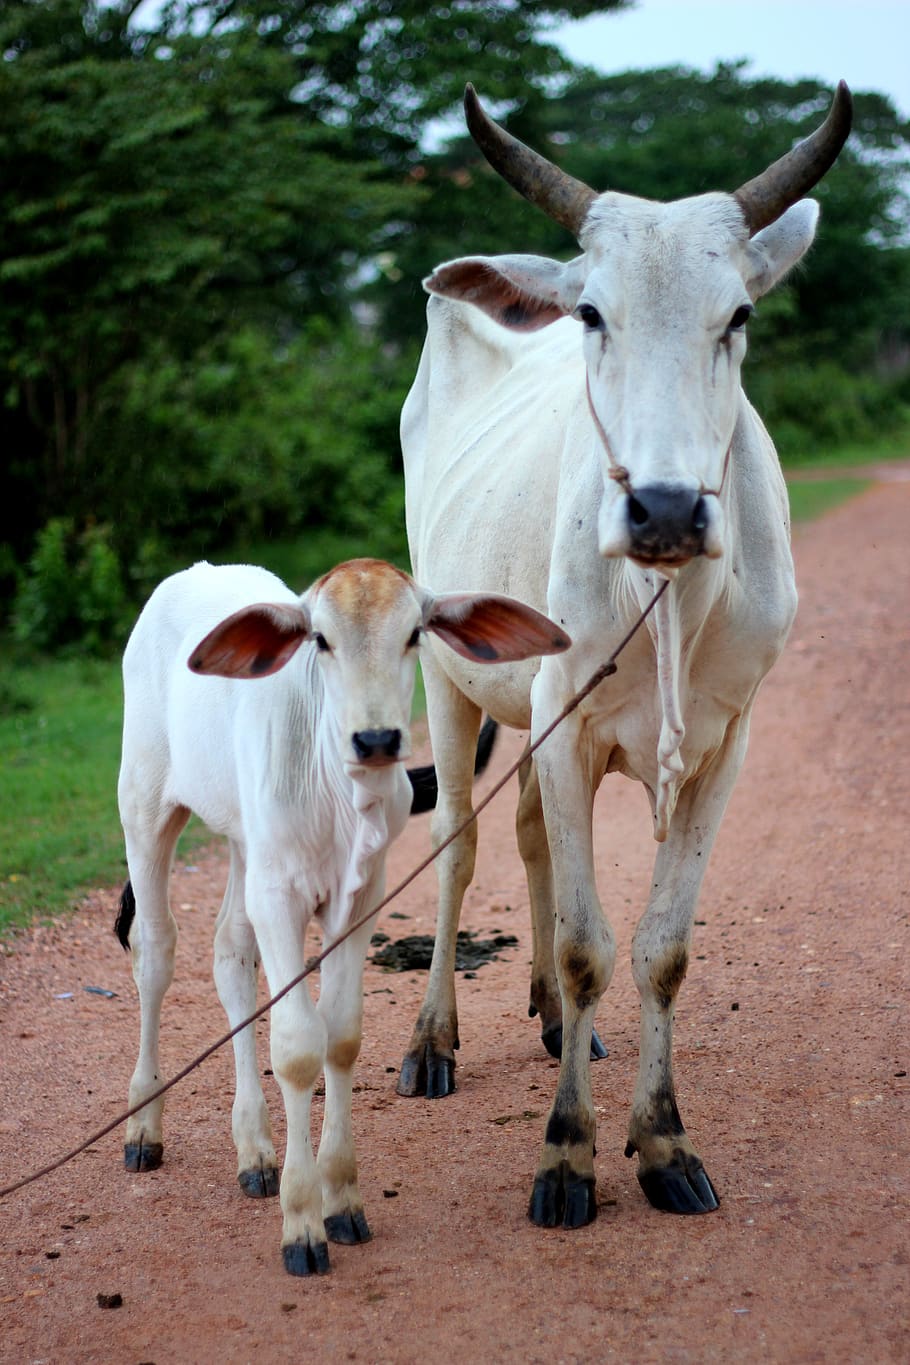 Cow calf Images - Search Images on Everypixel